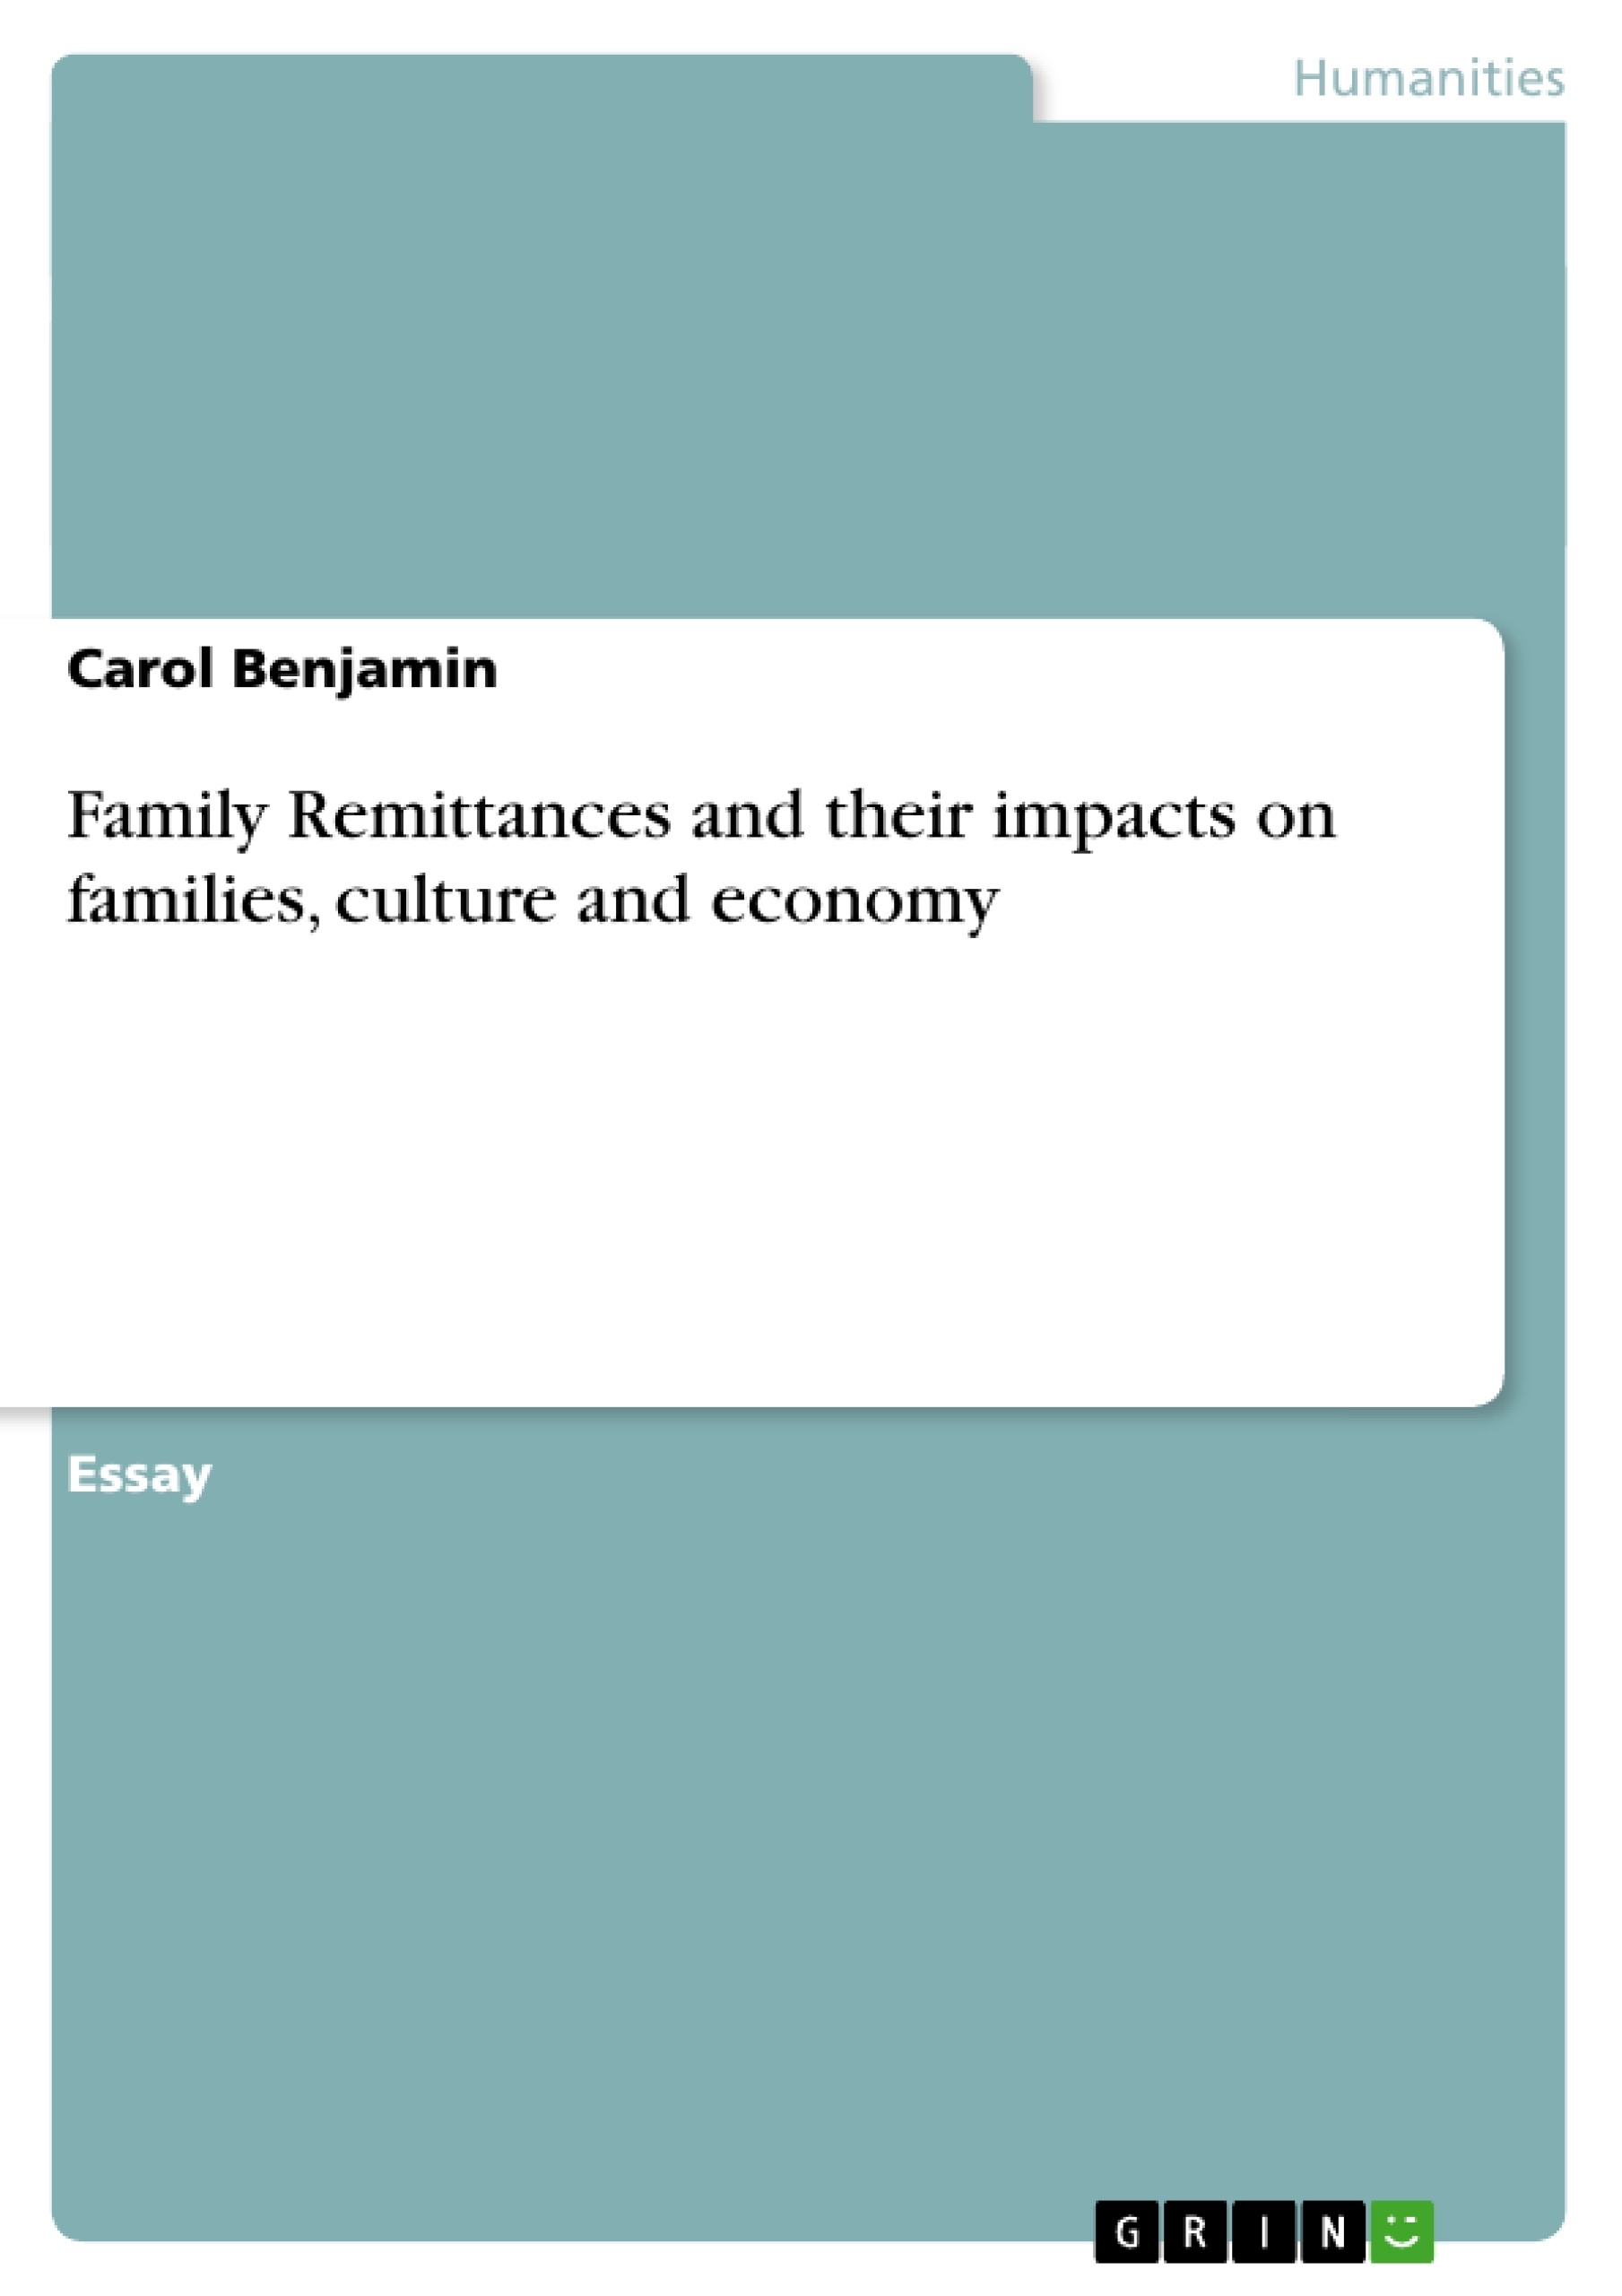 Título: Family Remittances and their impacts on families, culture and economy